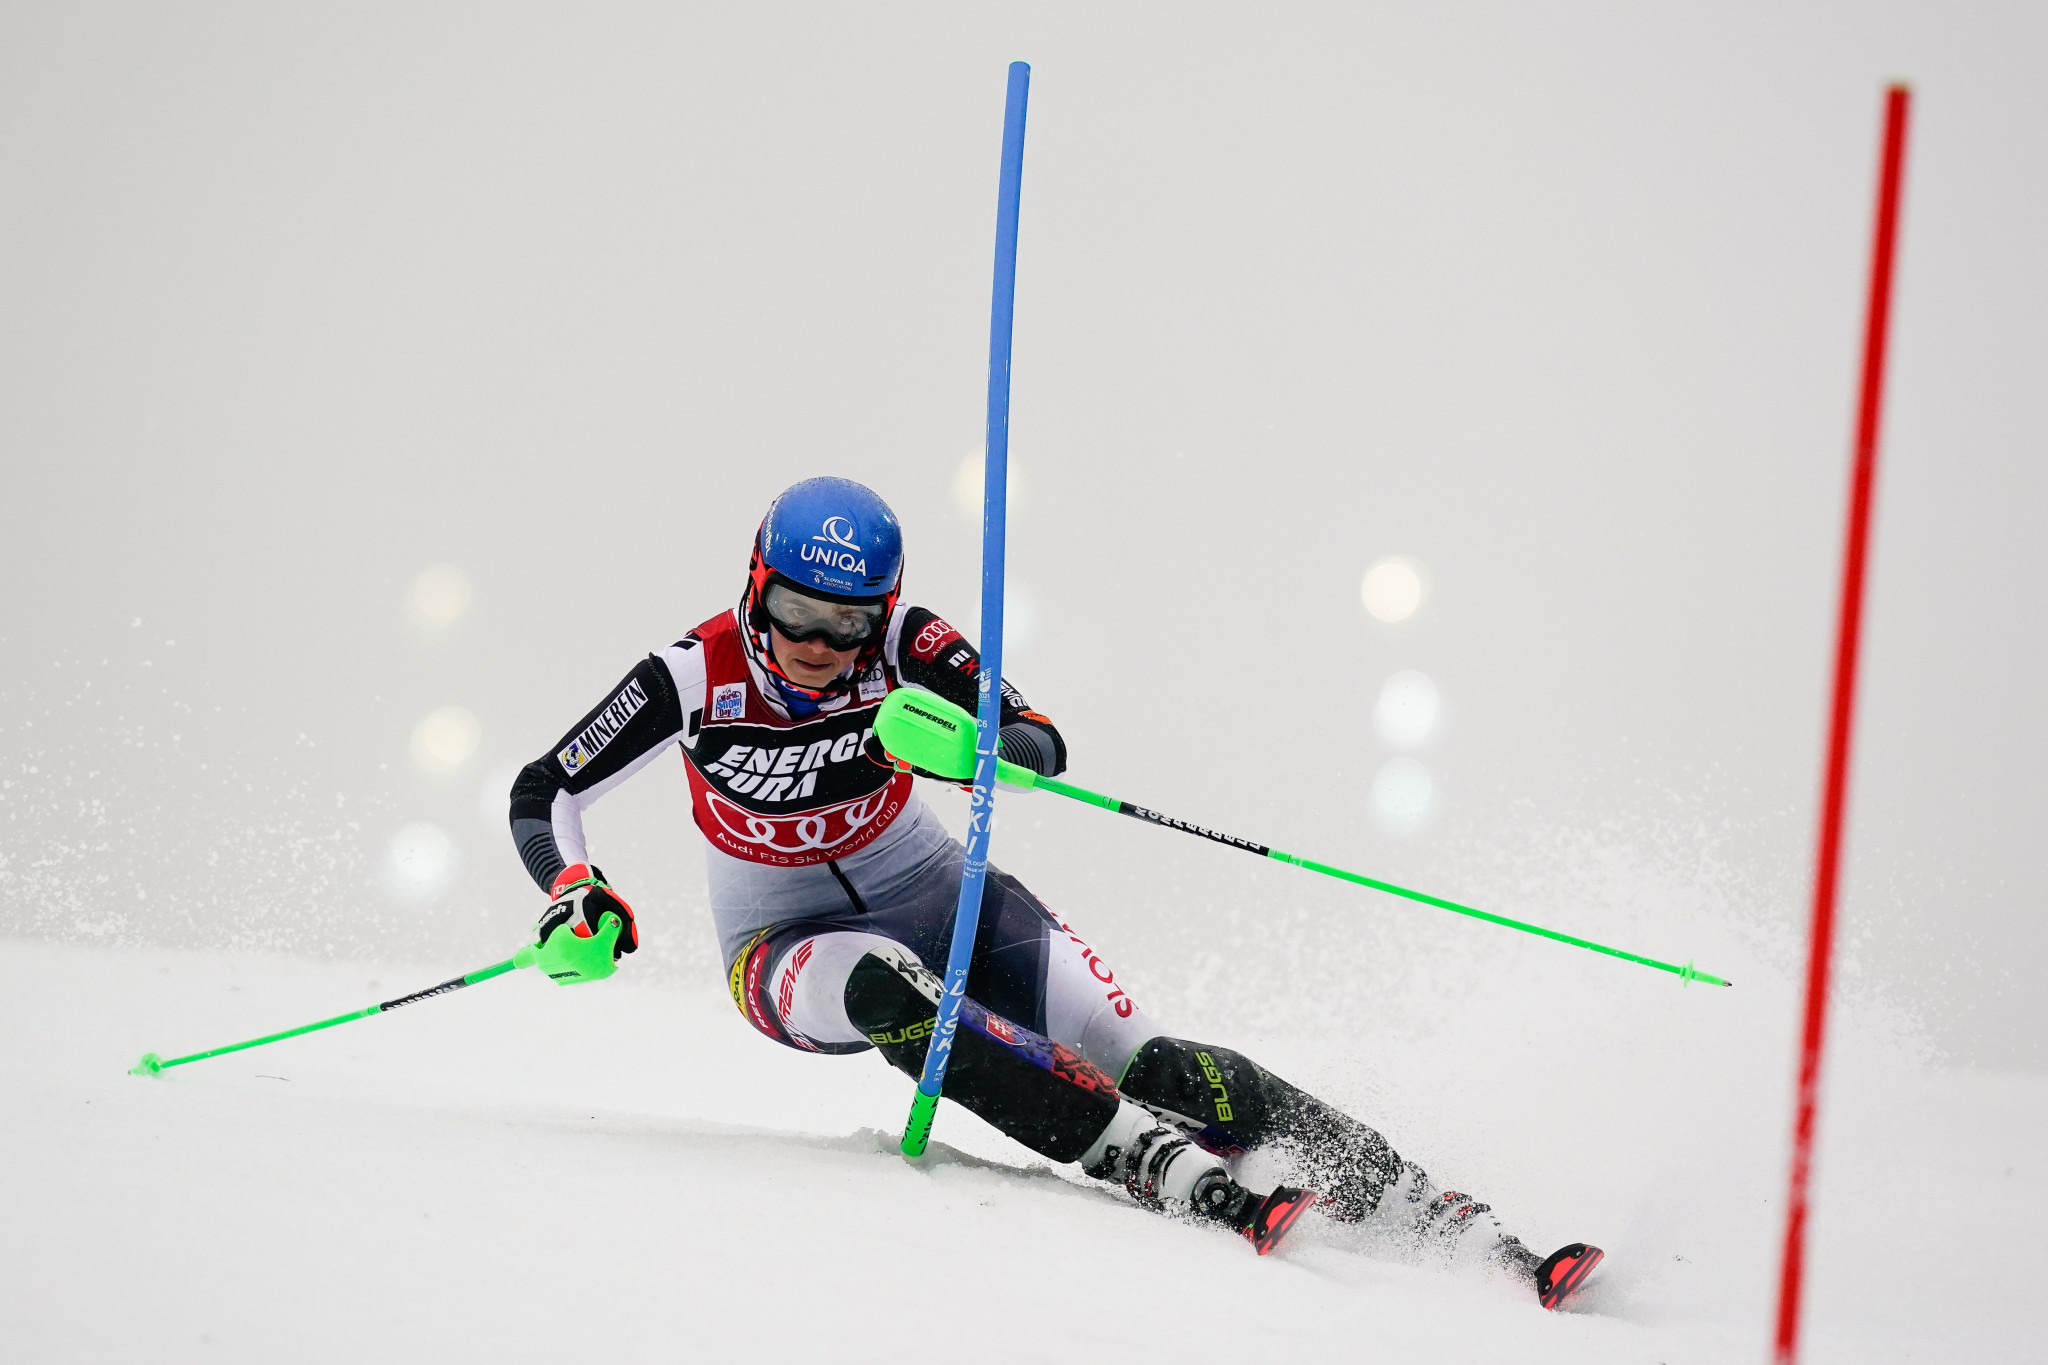 Petra Vlhová maintained her place at the top of the FIS Alpine Ski World Cup standings with victory in Zagreb ©Getty Images